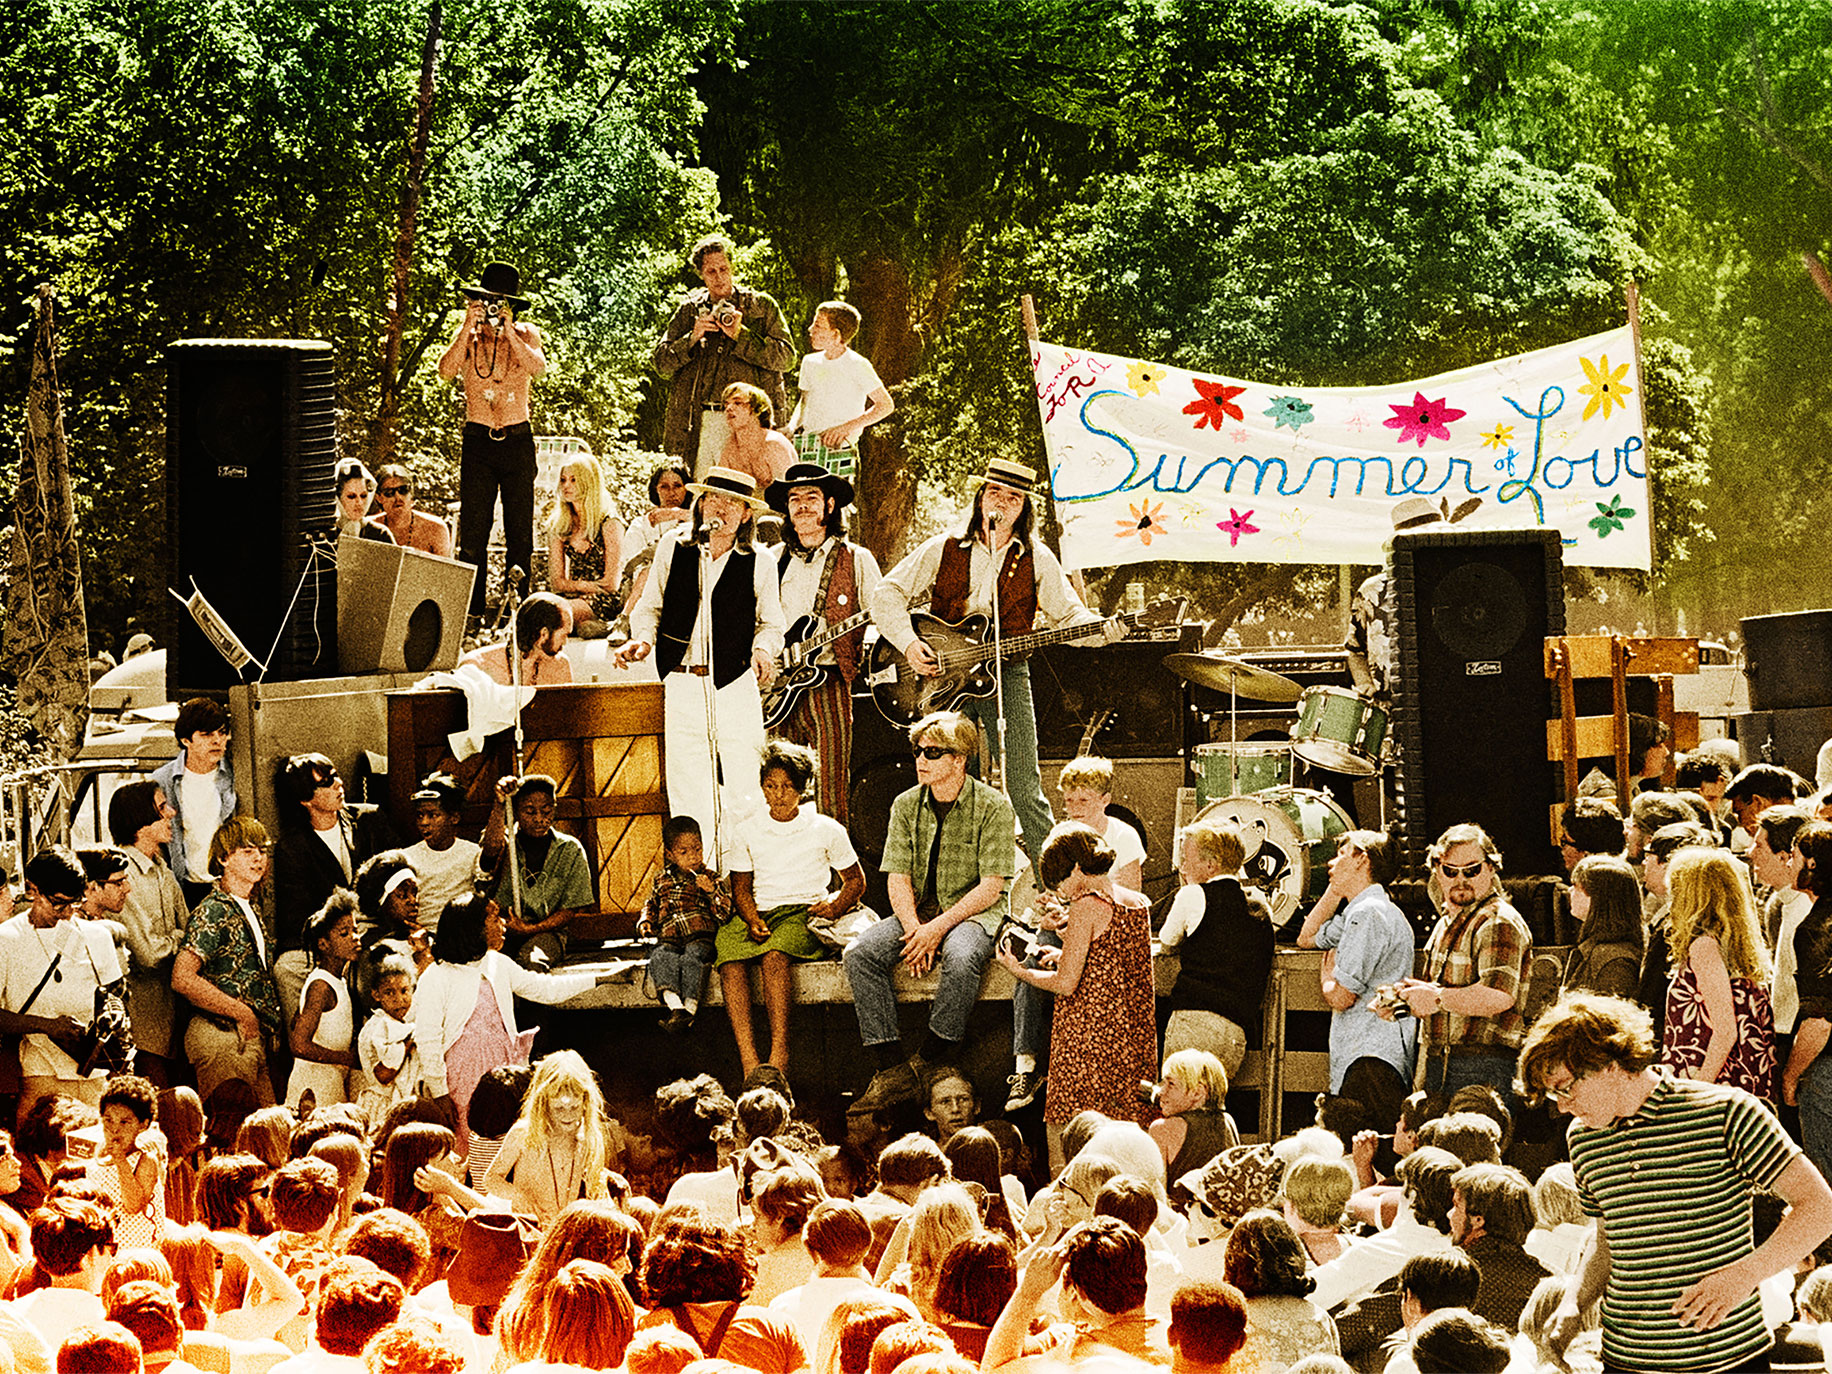 The Charlatans playing at the Summer of Love concert in Golden Gate Park, San Francisco, 1967.